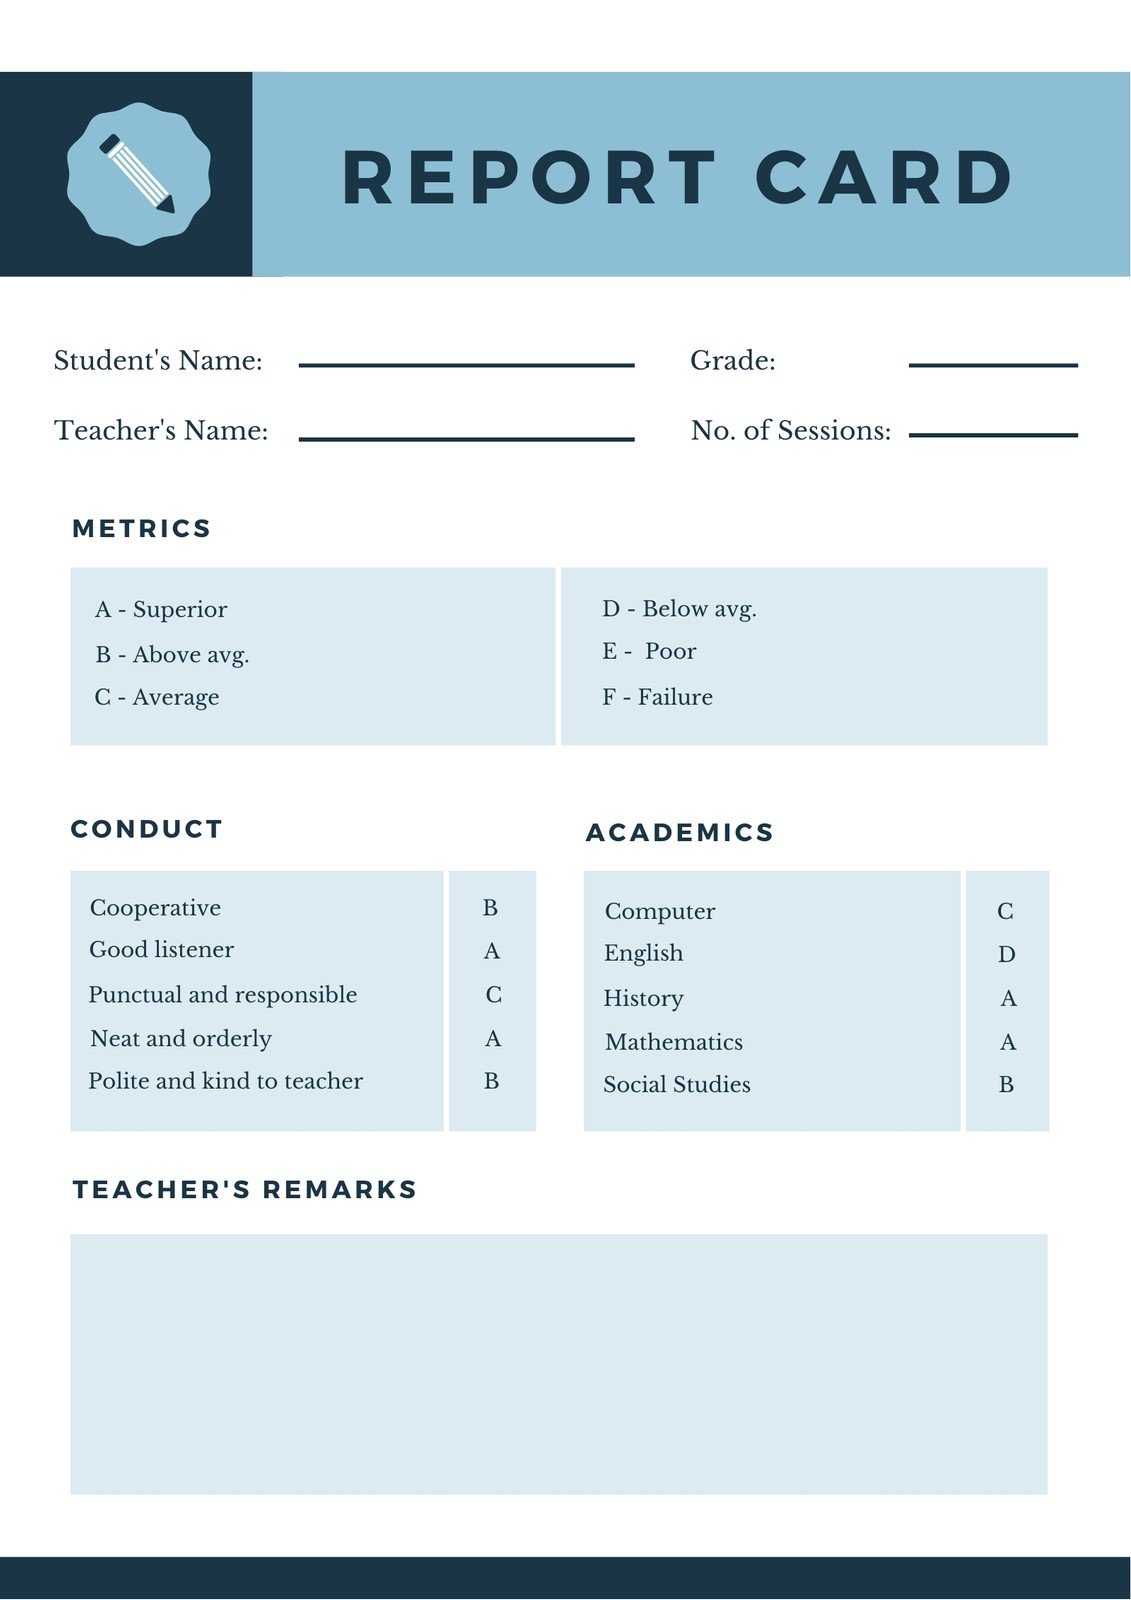 Page 20 - Free, printable, customizable report card templates  Canva For Blank Report Card Template